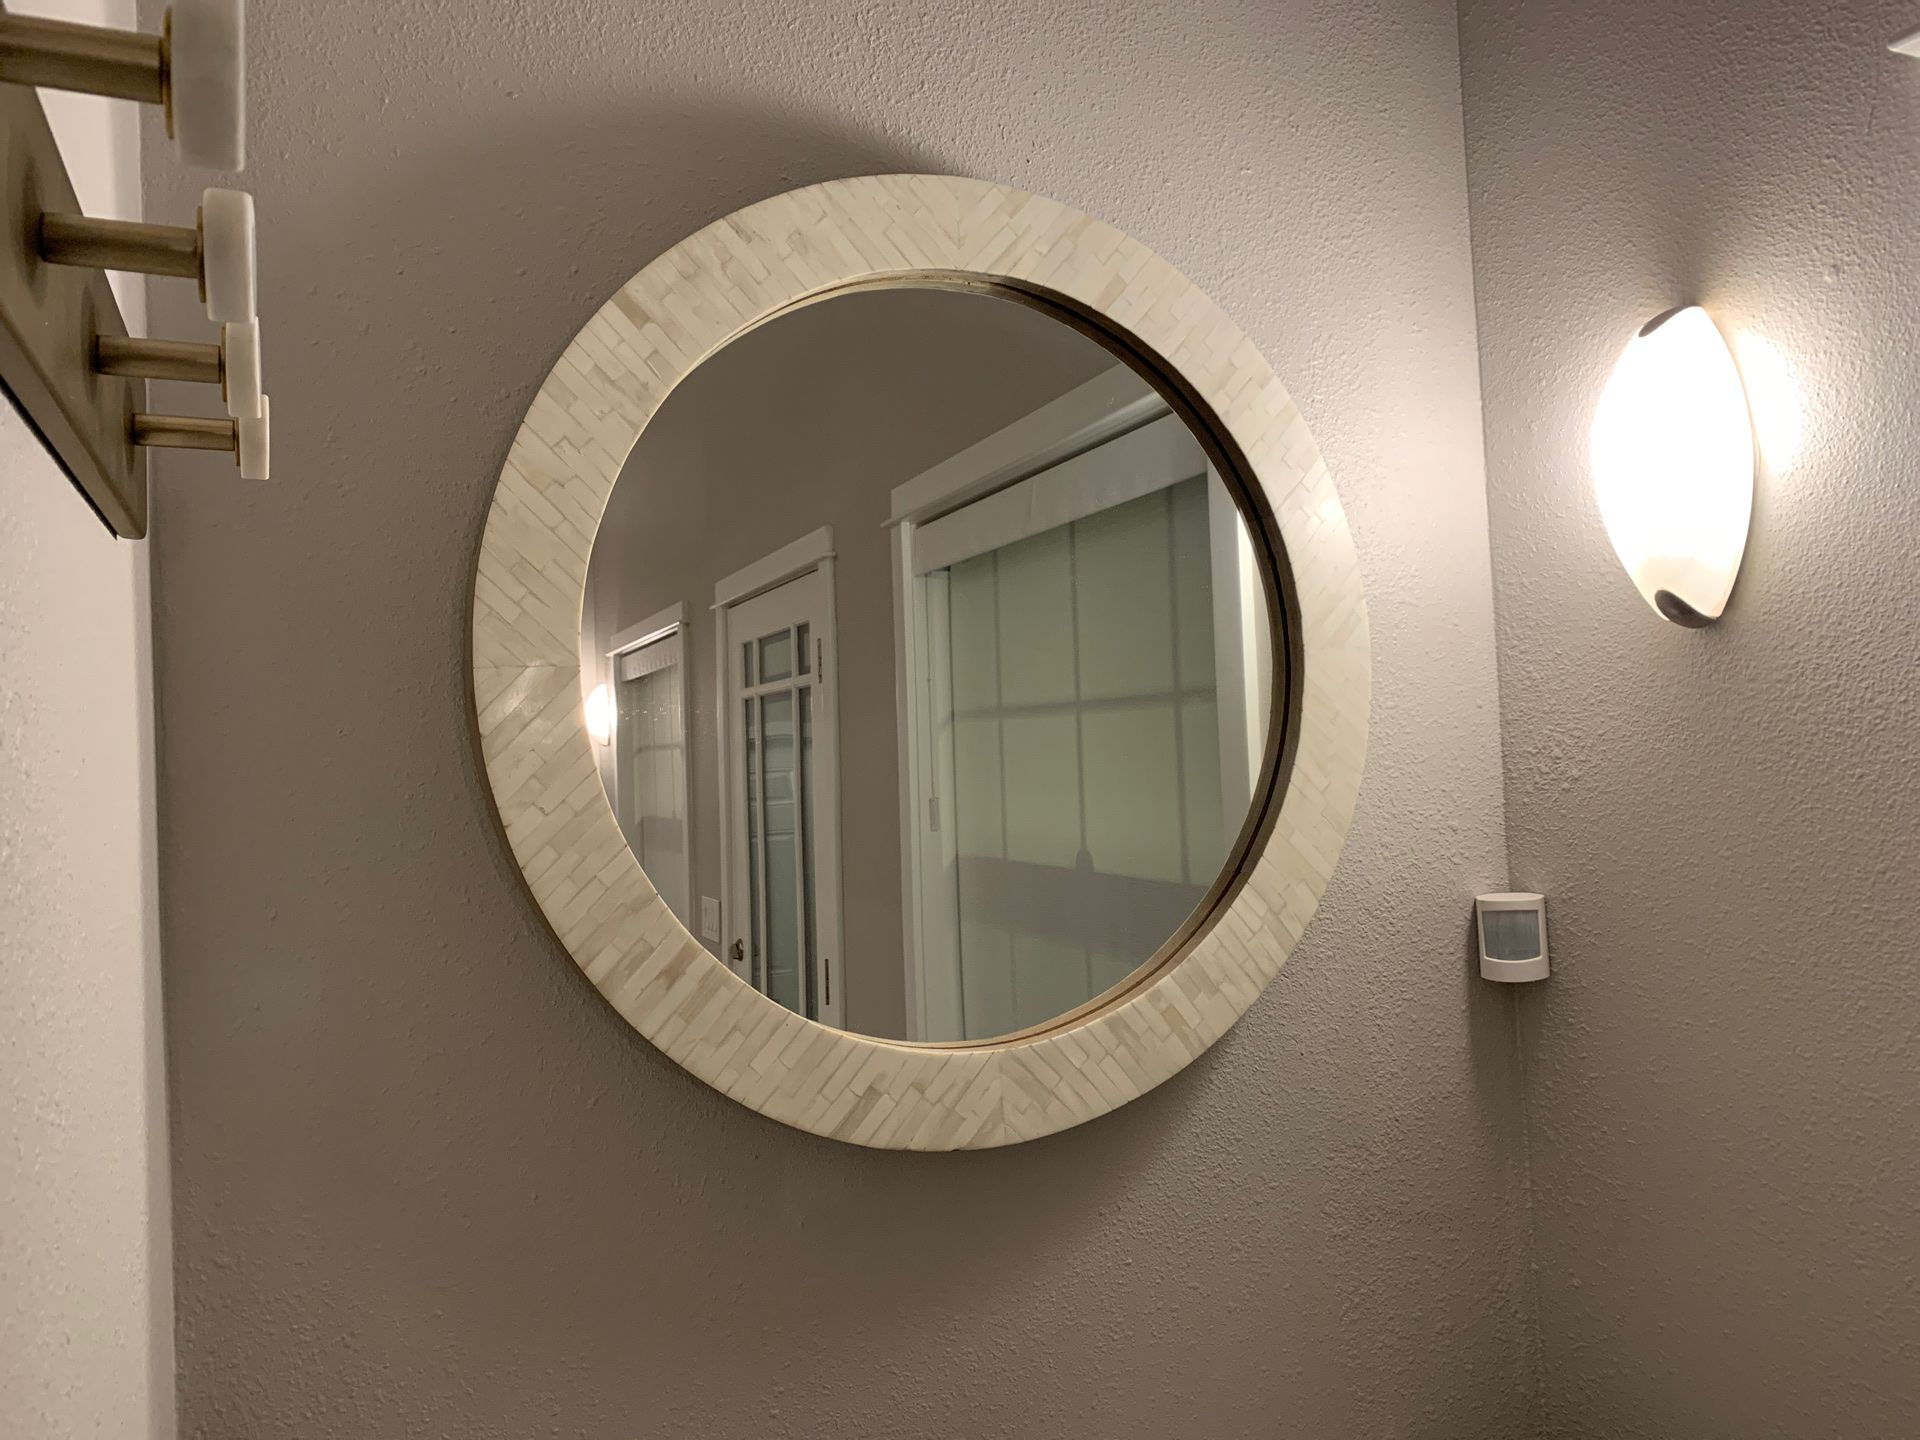 BRAND NEW - West Elm shell inlay 30 in mirror